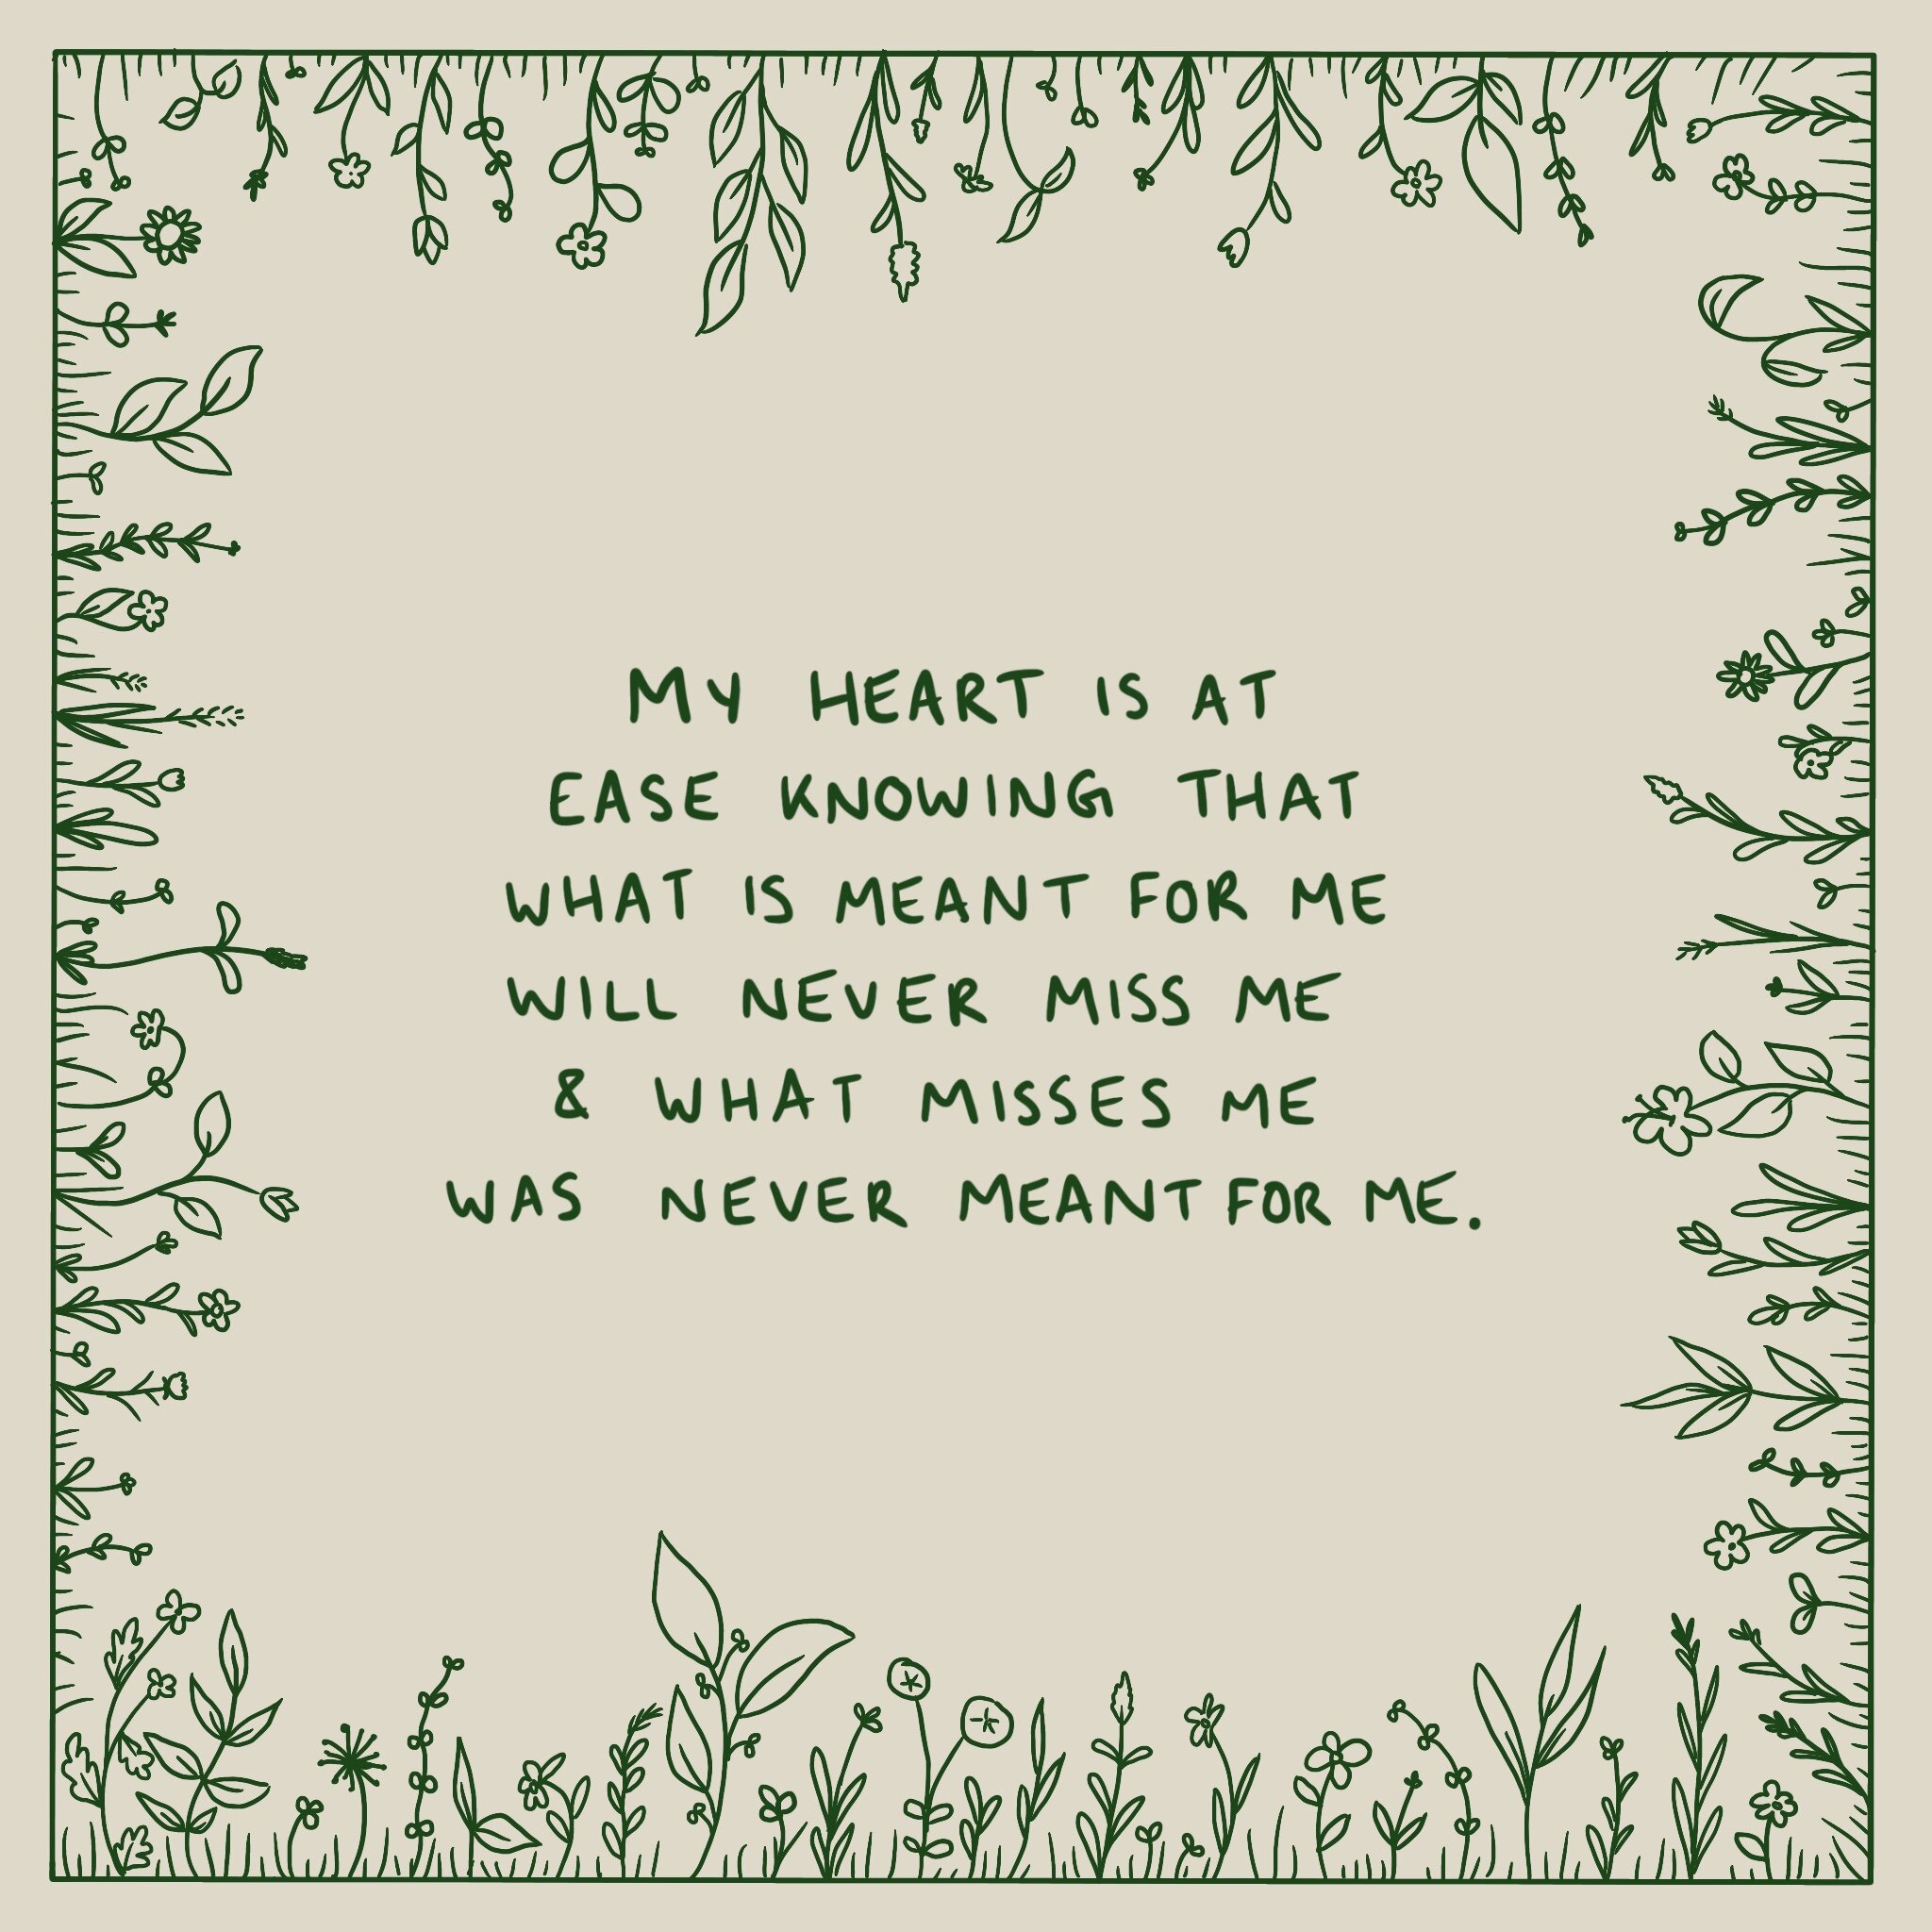 My heart is at ease knowing that what is meant for me will never miss me and what misses me was never meant for me.